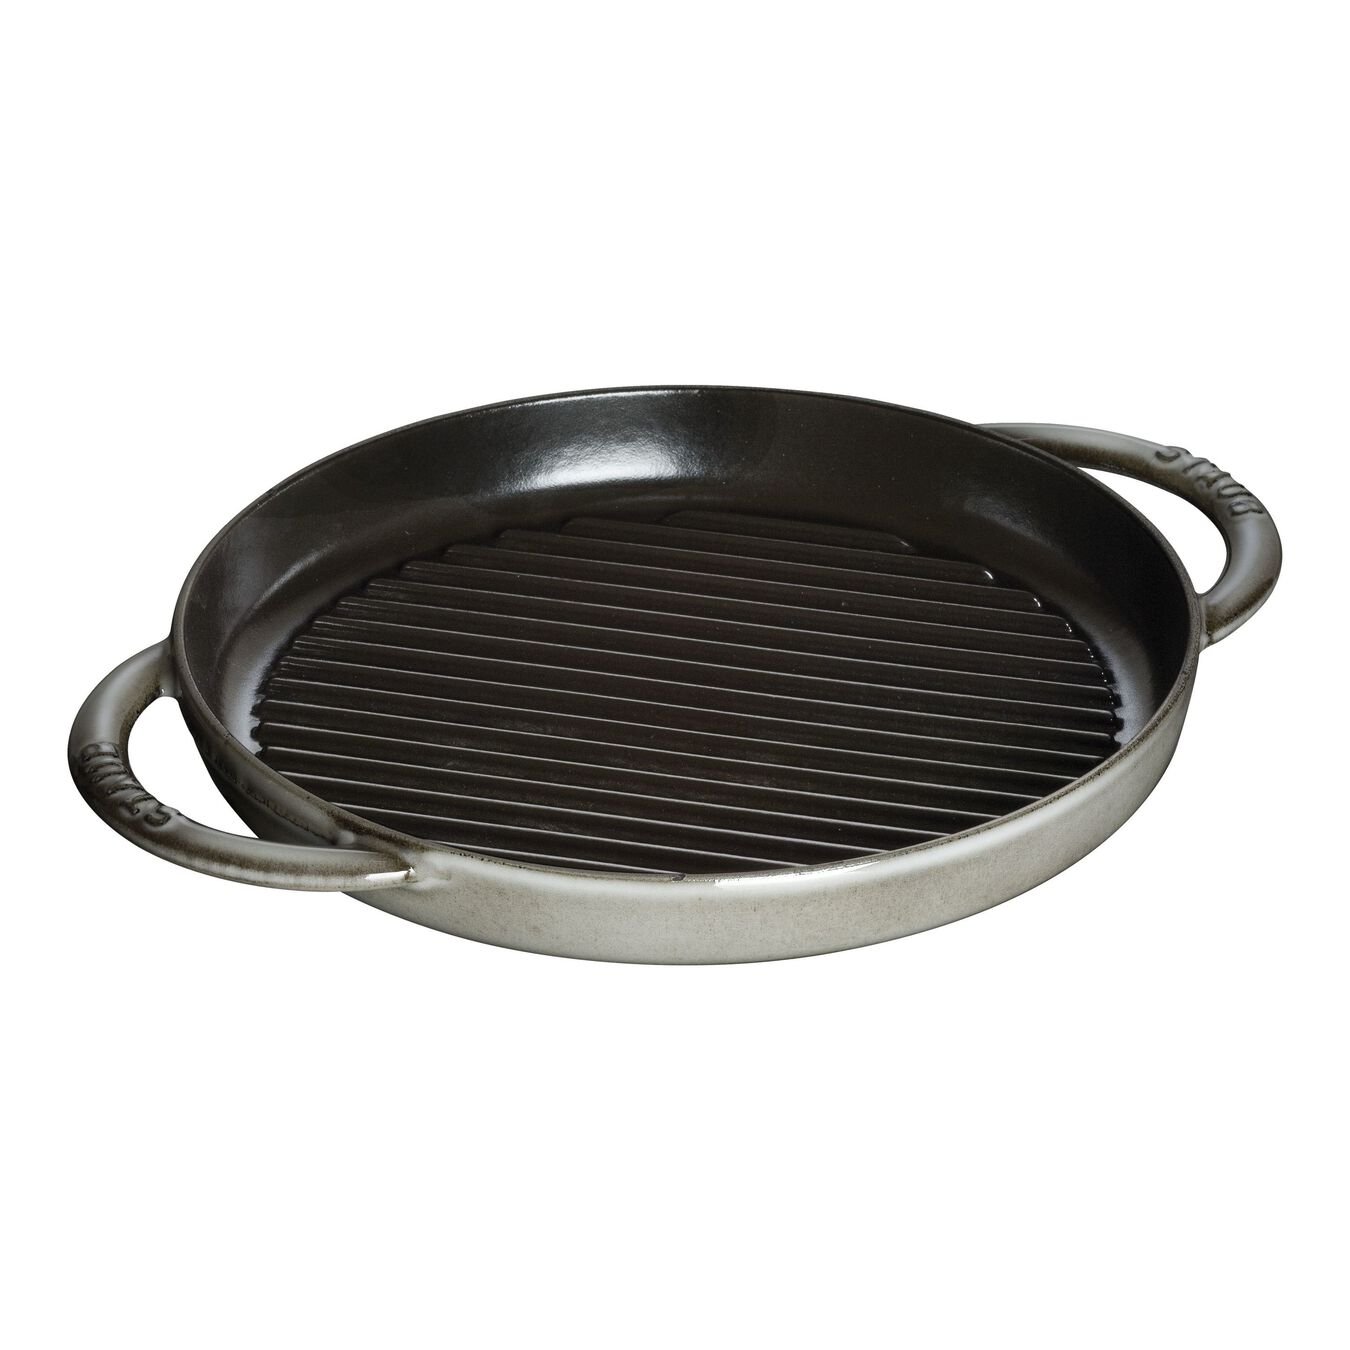 Staub Cast Iron Grill Pans 10 Inch Round Double Handle Pure Grill Graphite Grey Official 